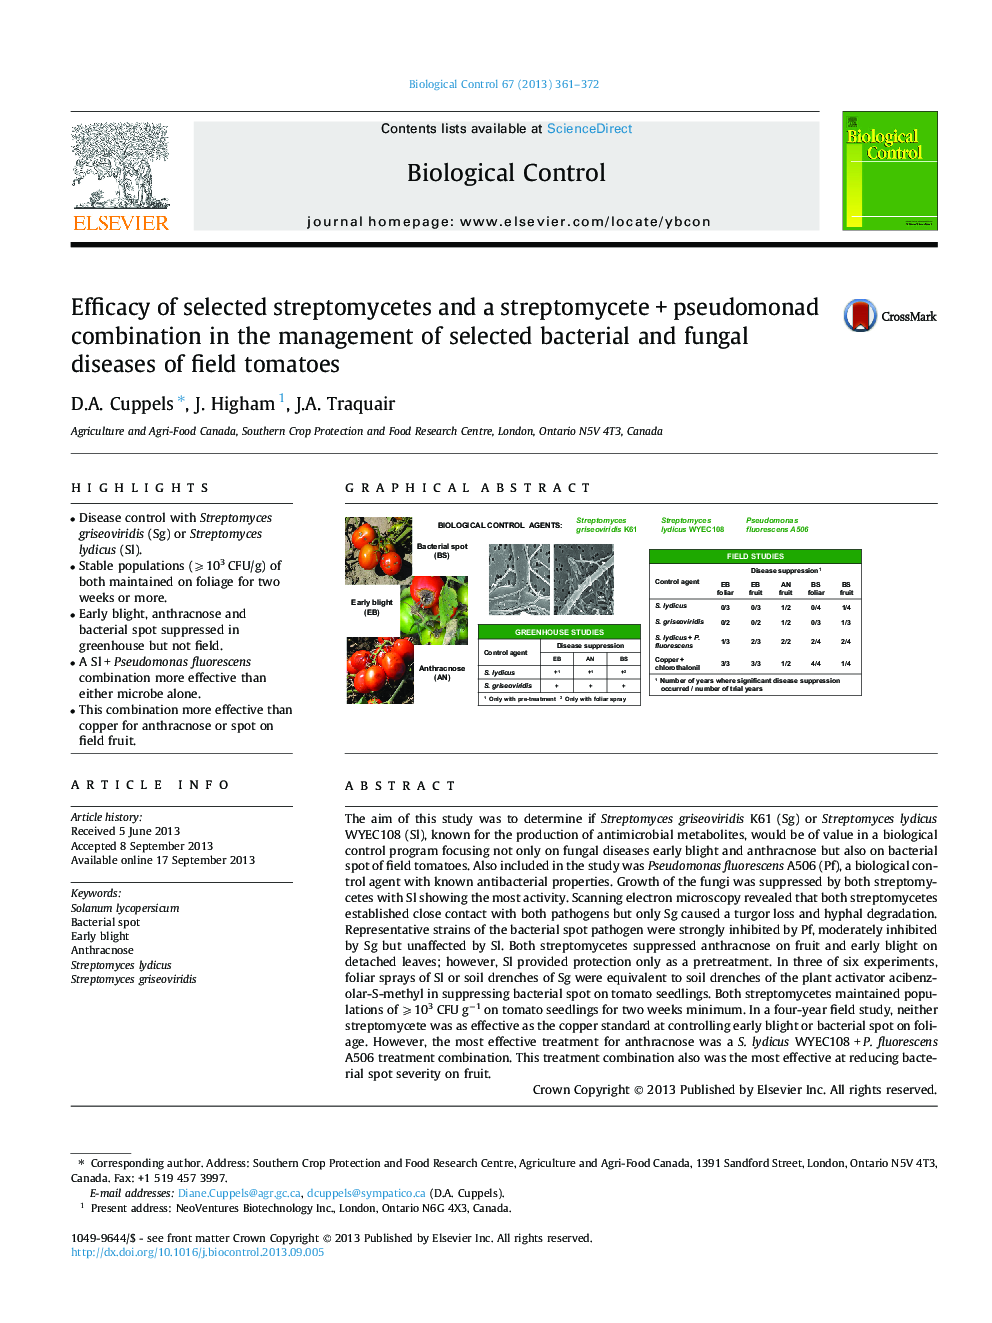 Efficacy of selected streptomycetes and a streptomyceteÂ +Â pseudomonad combination in the management of selected bacterial and fungal diseases of field tomatoes